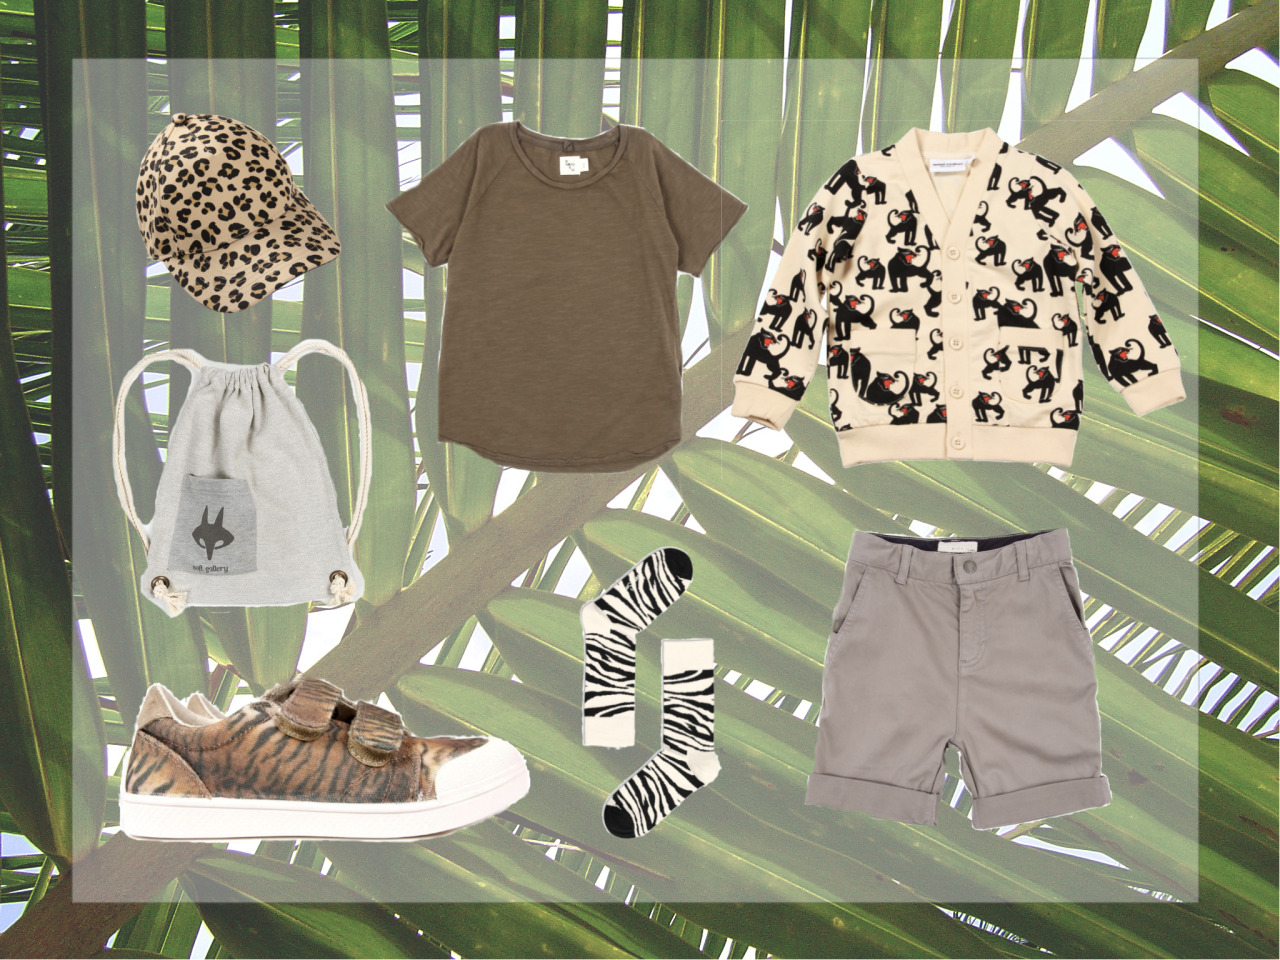 To the jungle!
1. Jaguar cap by Mini Rodini 2. Khaki green tee by NicoNico 3. Panther jacket by Mini Rodini 3. Jersey backpack by Soft gallery 4. Tiger sneakers by 10is 5. Zebra socks by Happysocks 6. Grey Lucas bermudas by Stella McCartney